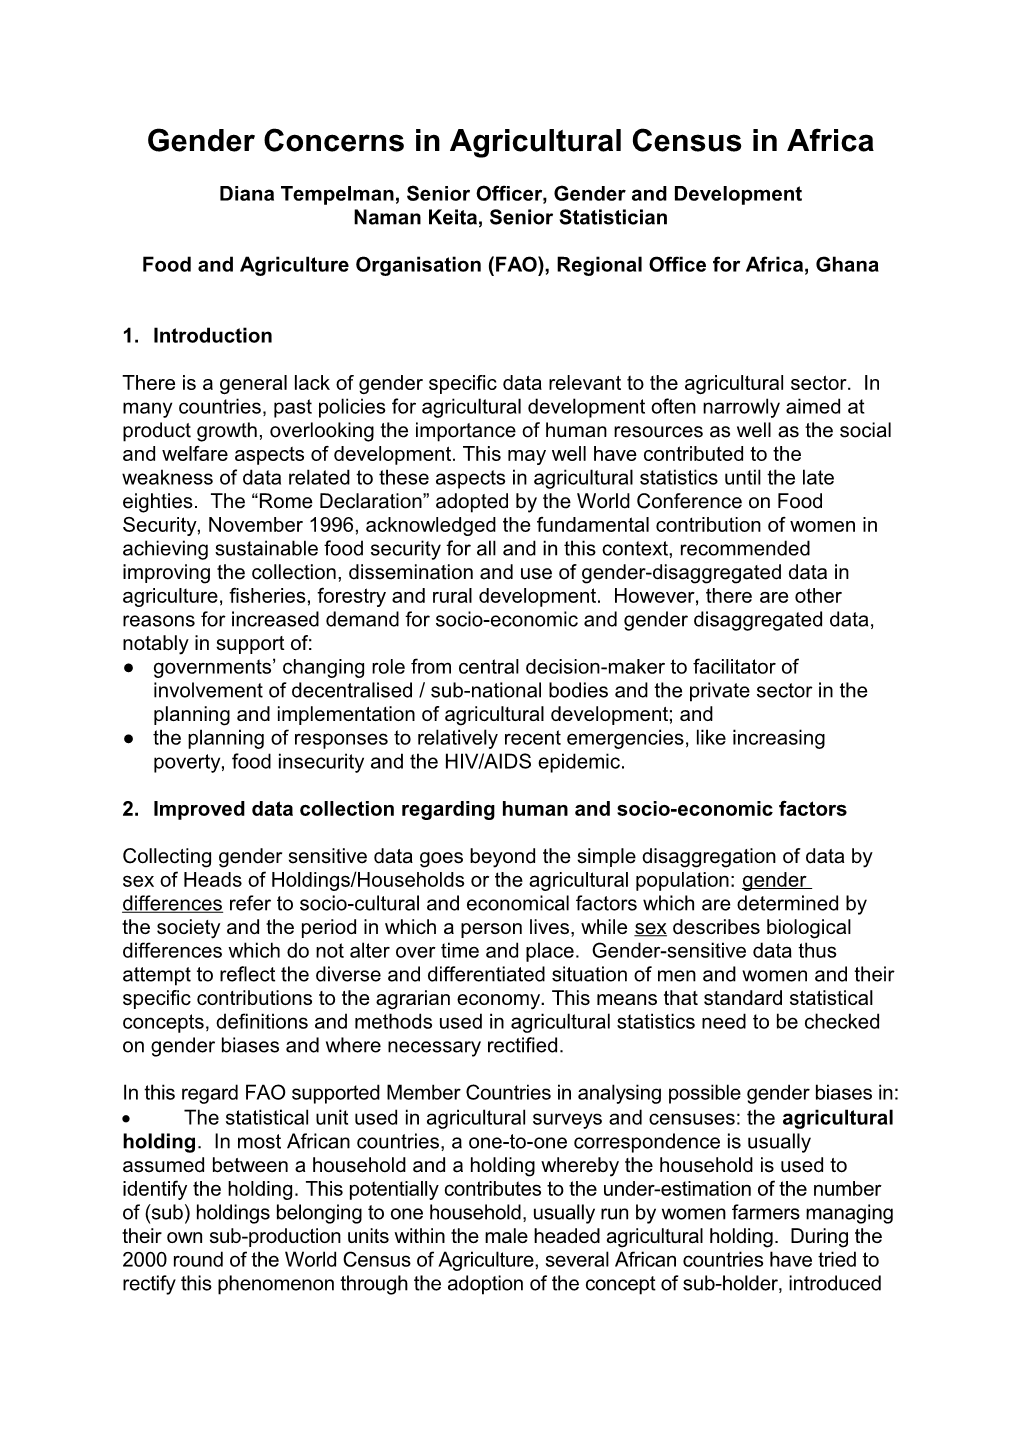 FAO - Integration of Gender Concerns Into Agricultural Census in Africa, 1995 - 2004